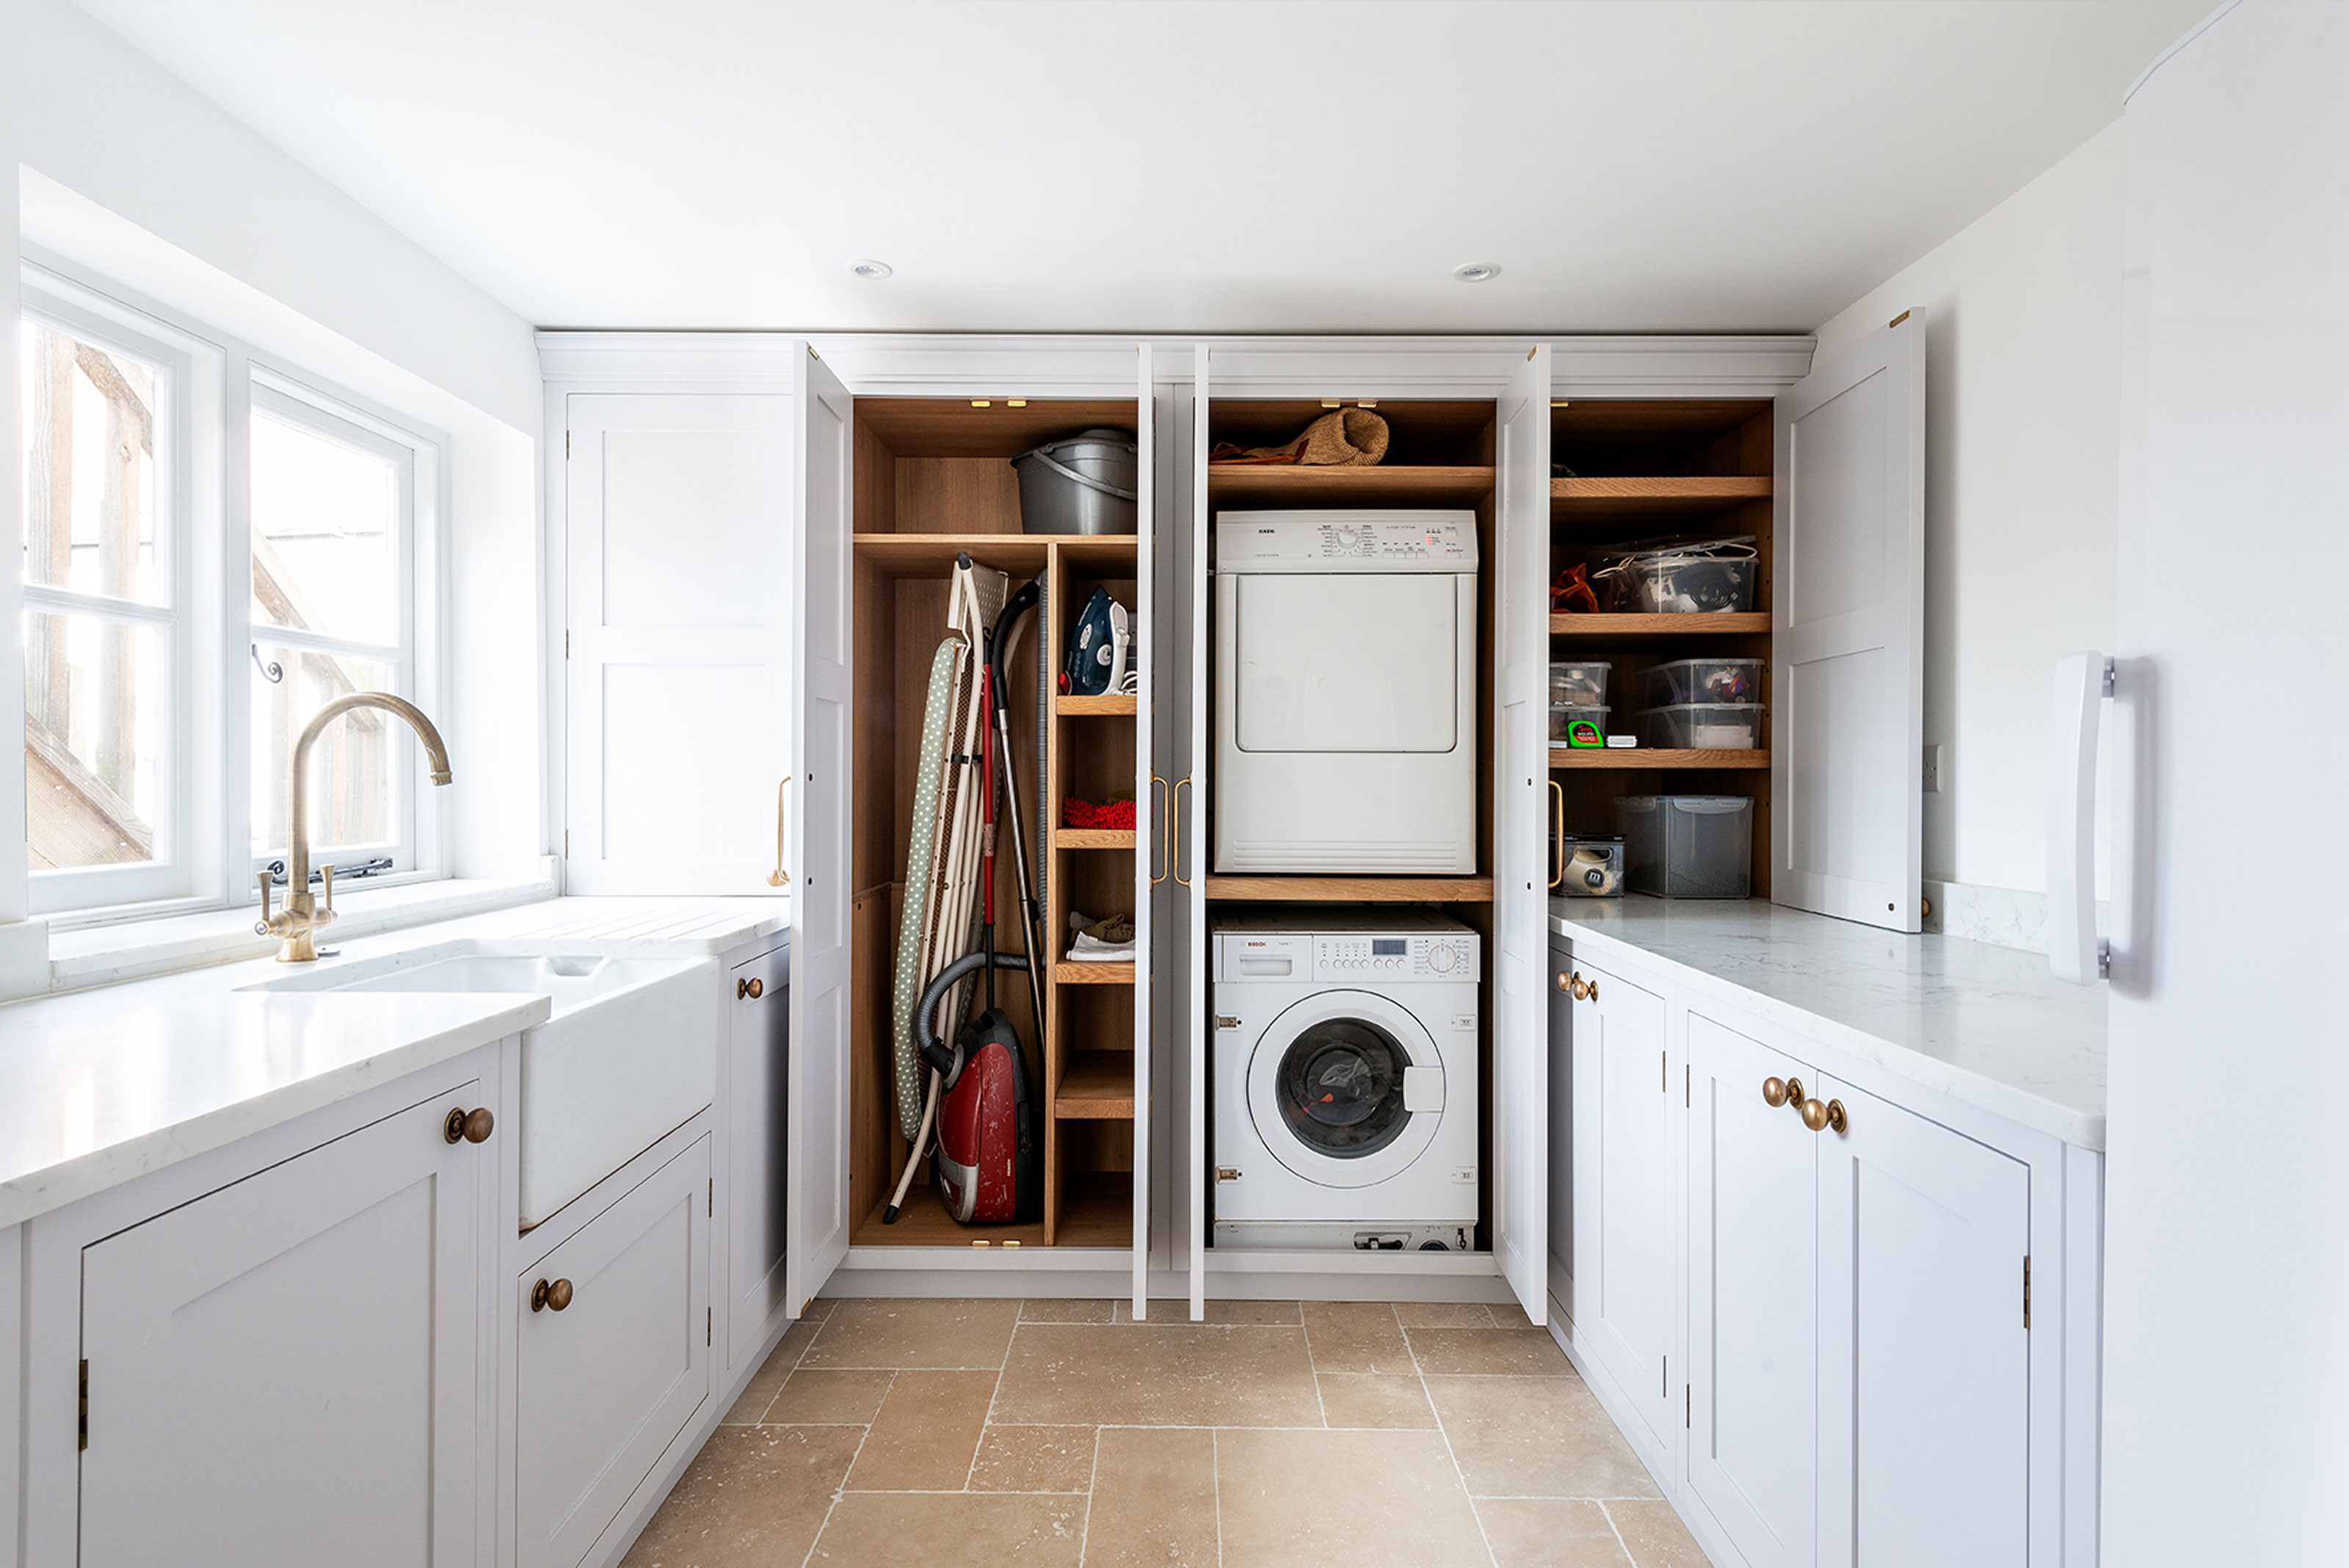 Utility room ideas – 10 ways to design a space that balances form ...